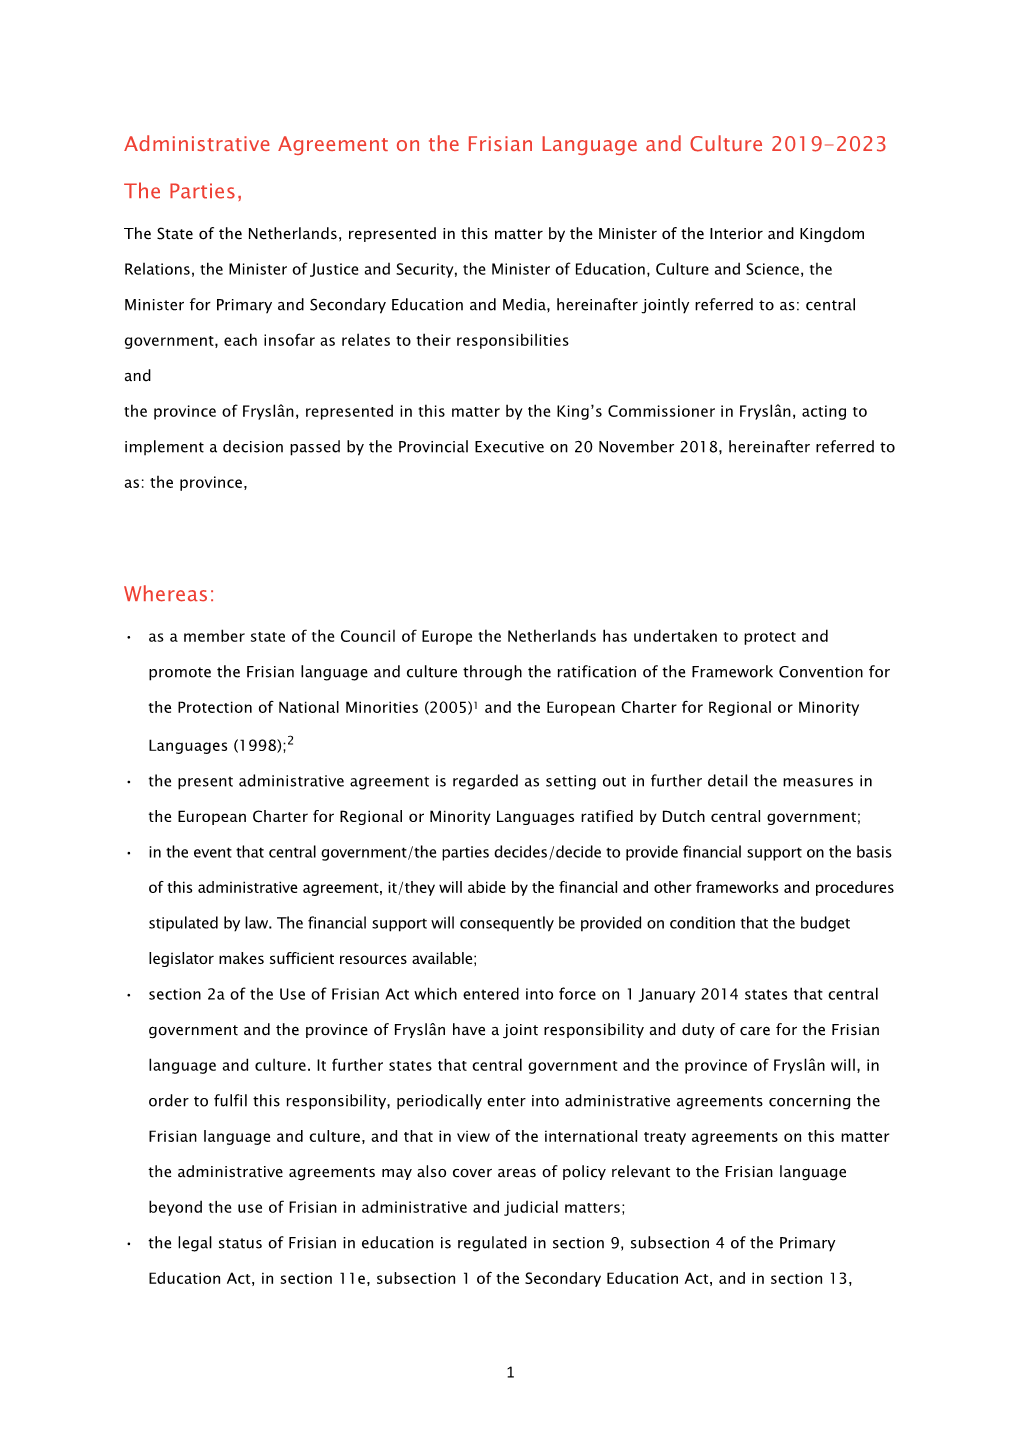 Administrative Agreement on the Frisian Language and Culture 2019-2023 the Parties, Whereas